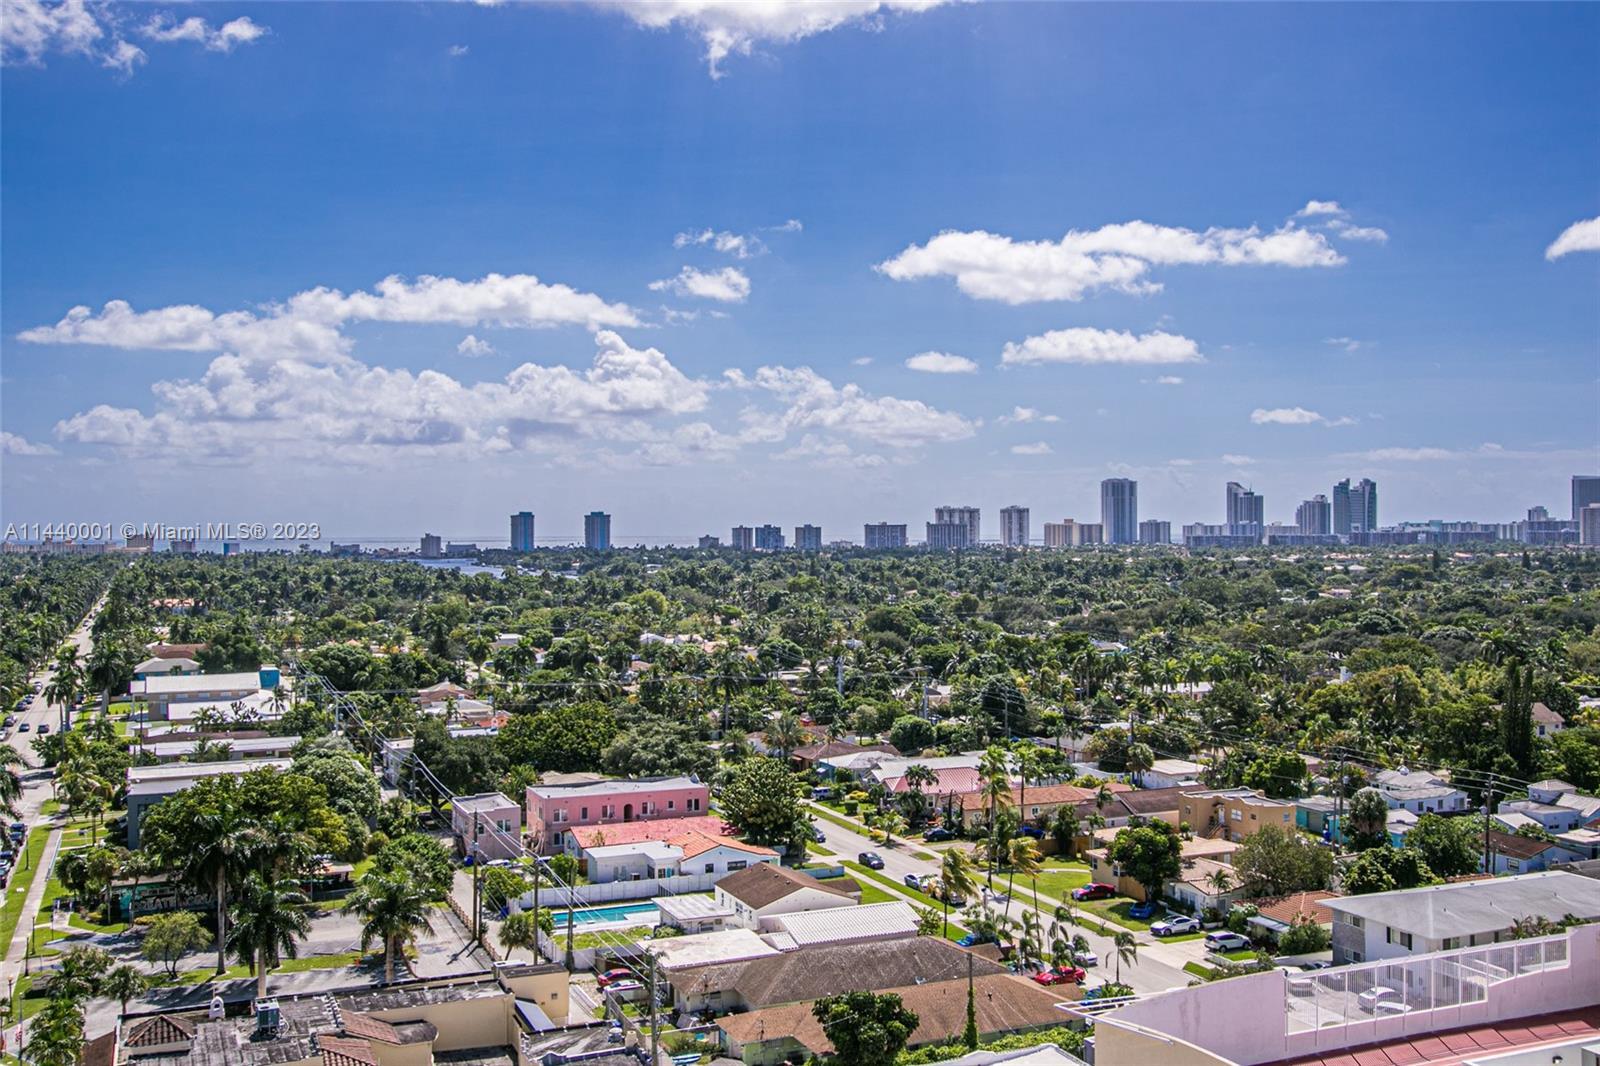 This condo is located in the famous Young Circle of Hollywood, Florida. It offers stunning skyline v